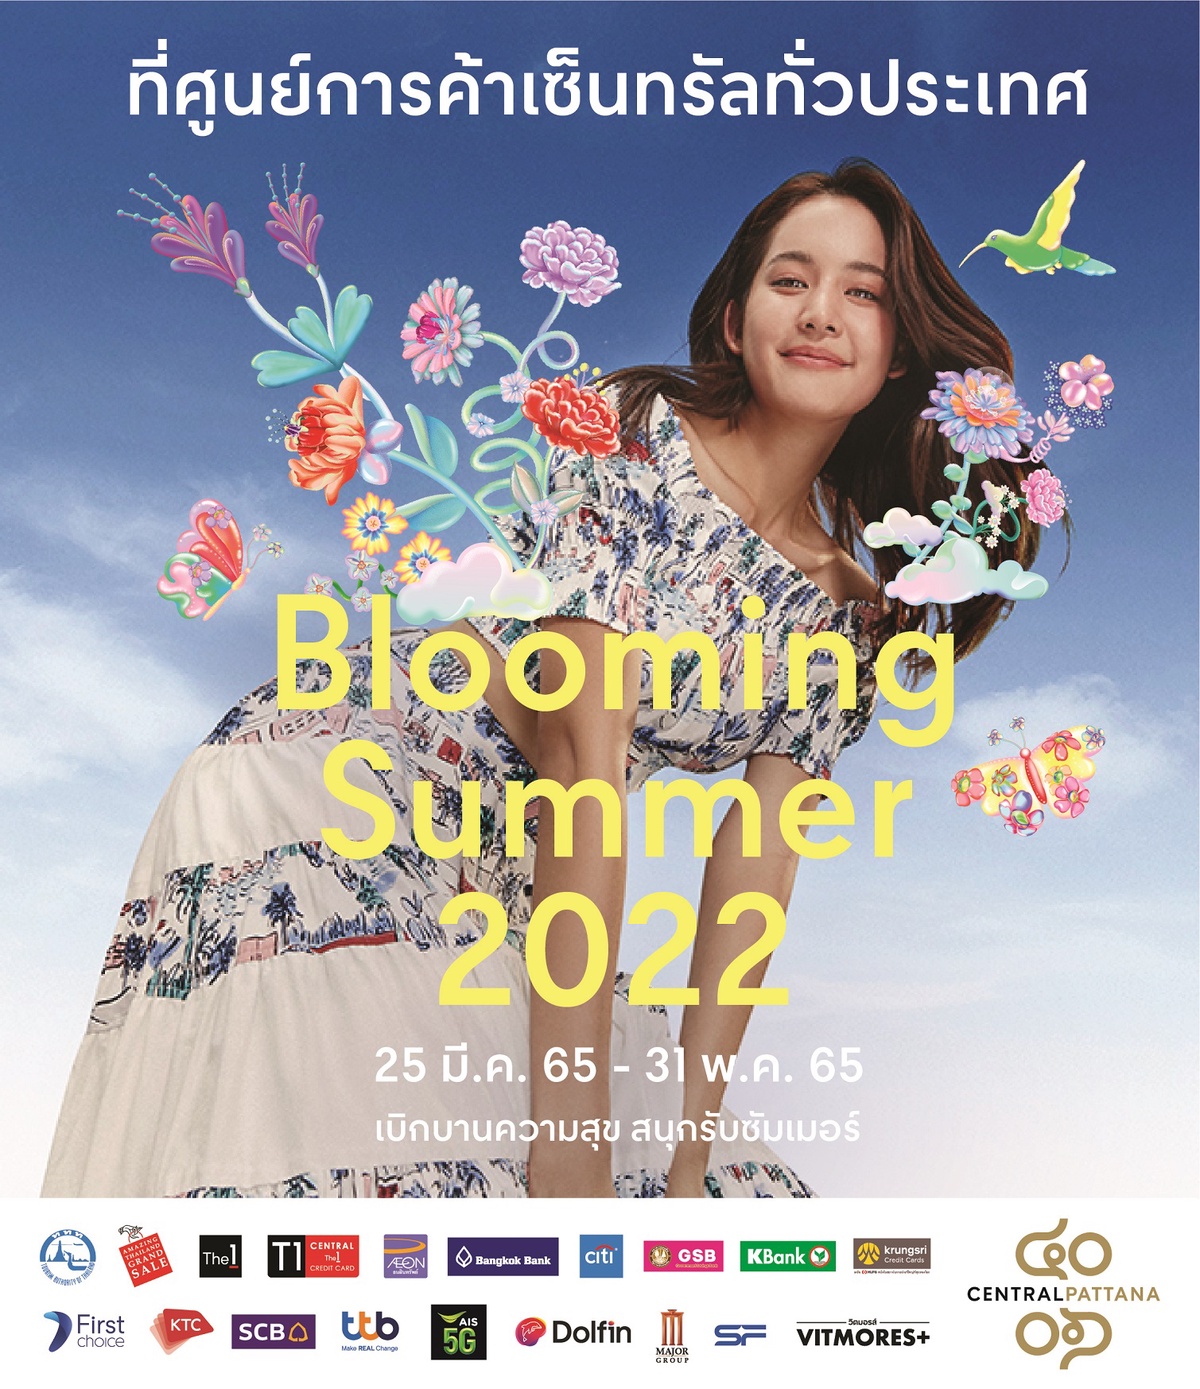 Central Pattana awakens tourism sector to welcome summer with 'Blooming Summer 2022' campaign, investing over 200 million baht in huge campaign to celebrate 40th